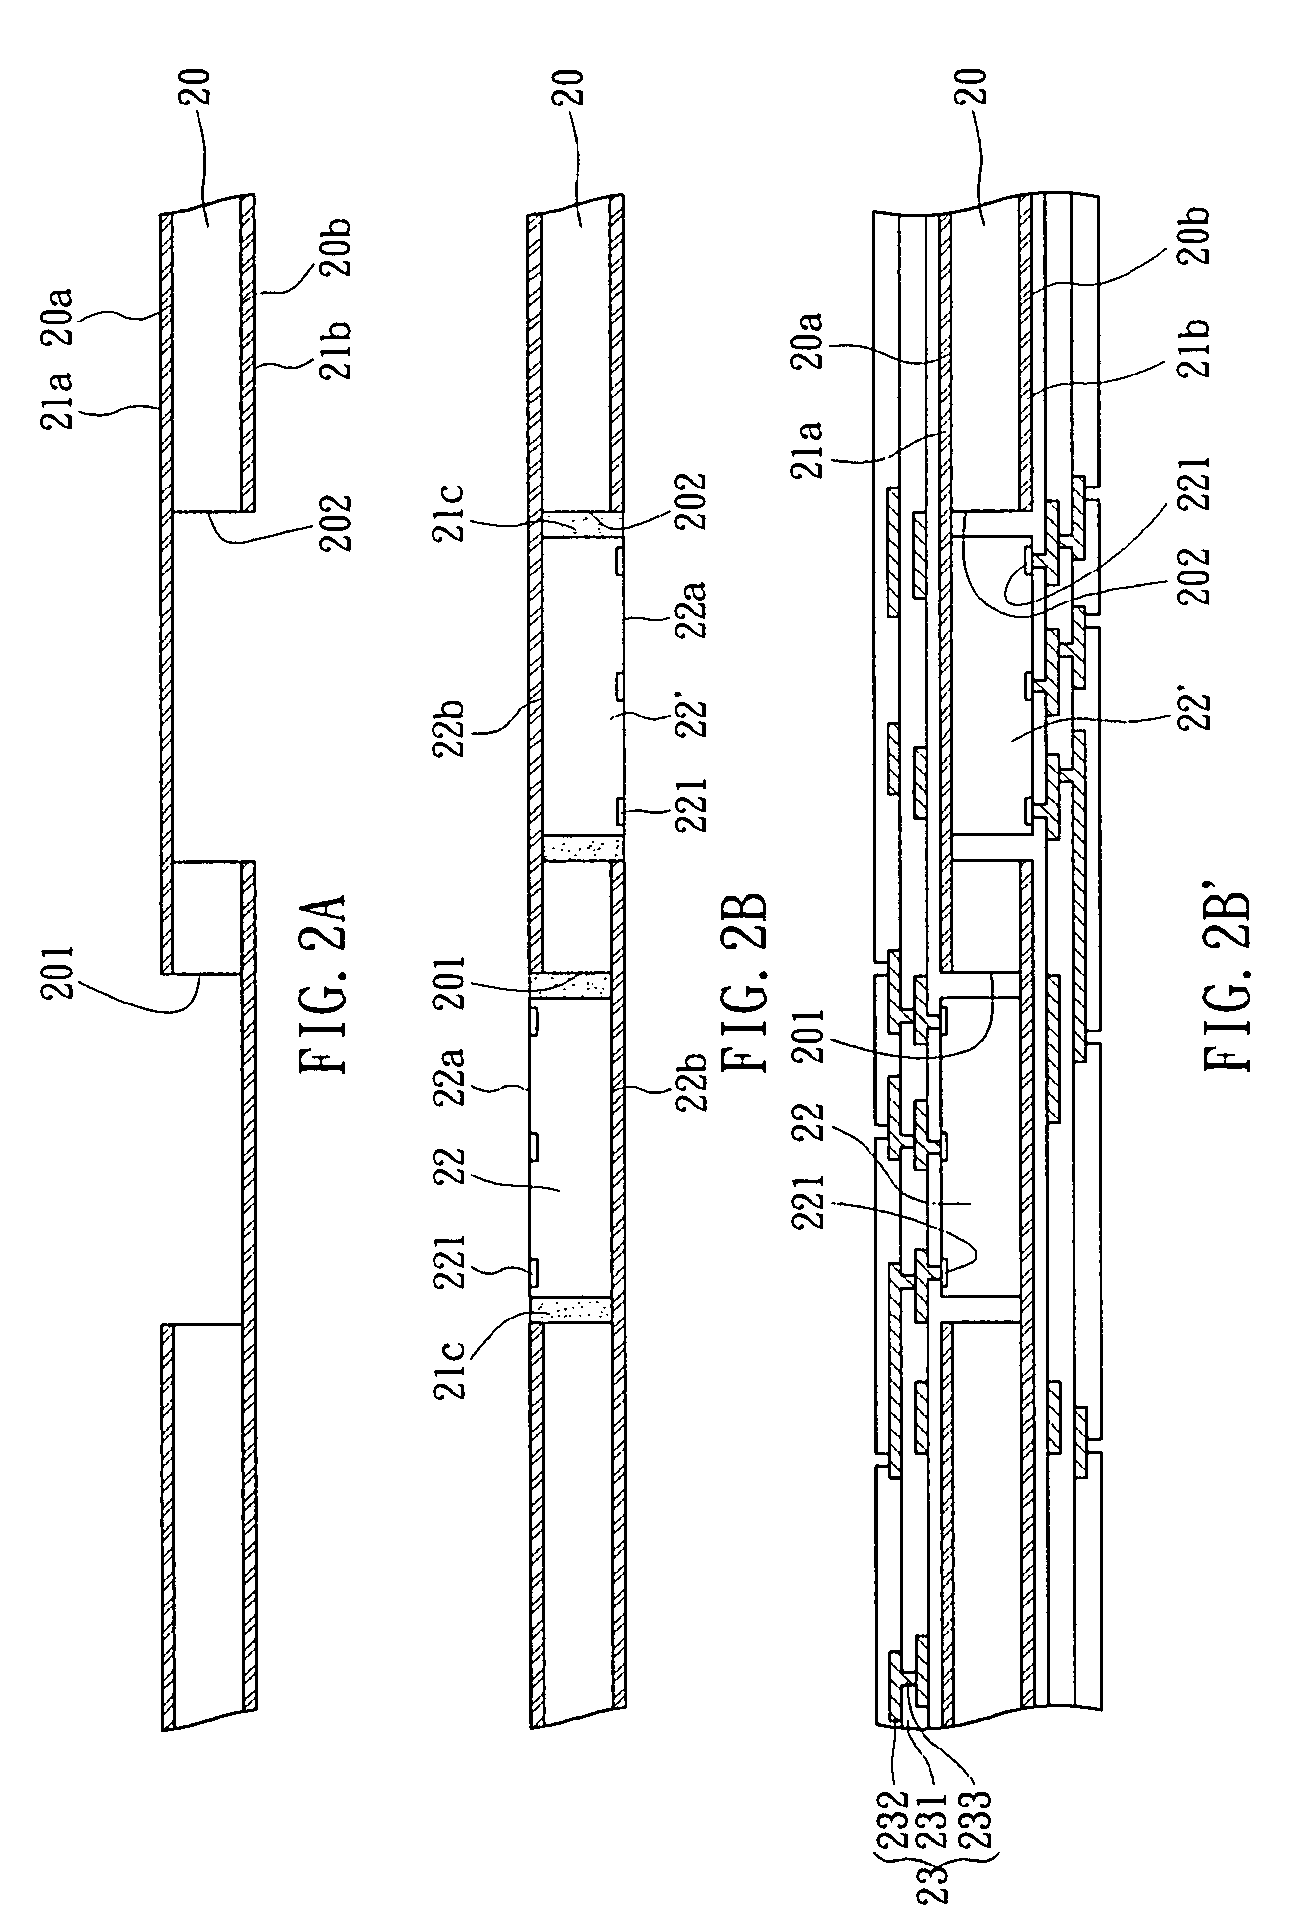 Packaging substrate having heat-dissipating structure